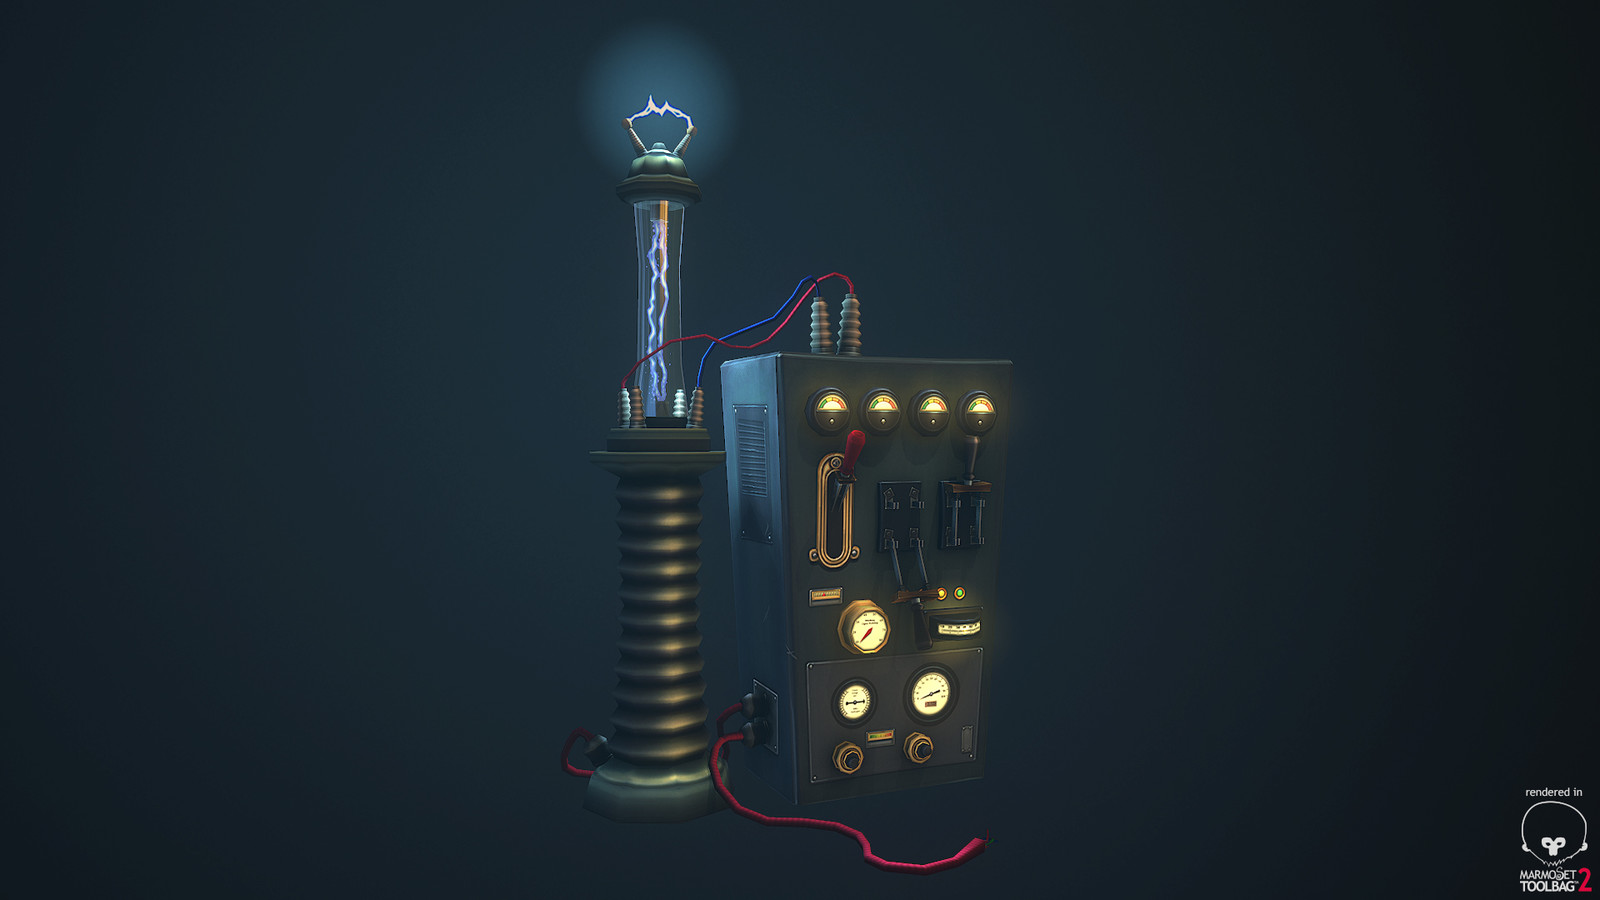 Tesla's Lab - This is the first of a set of mad scientist props. More to come!